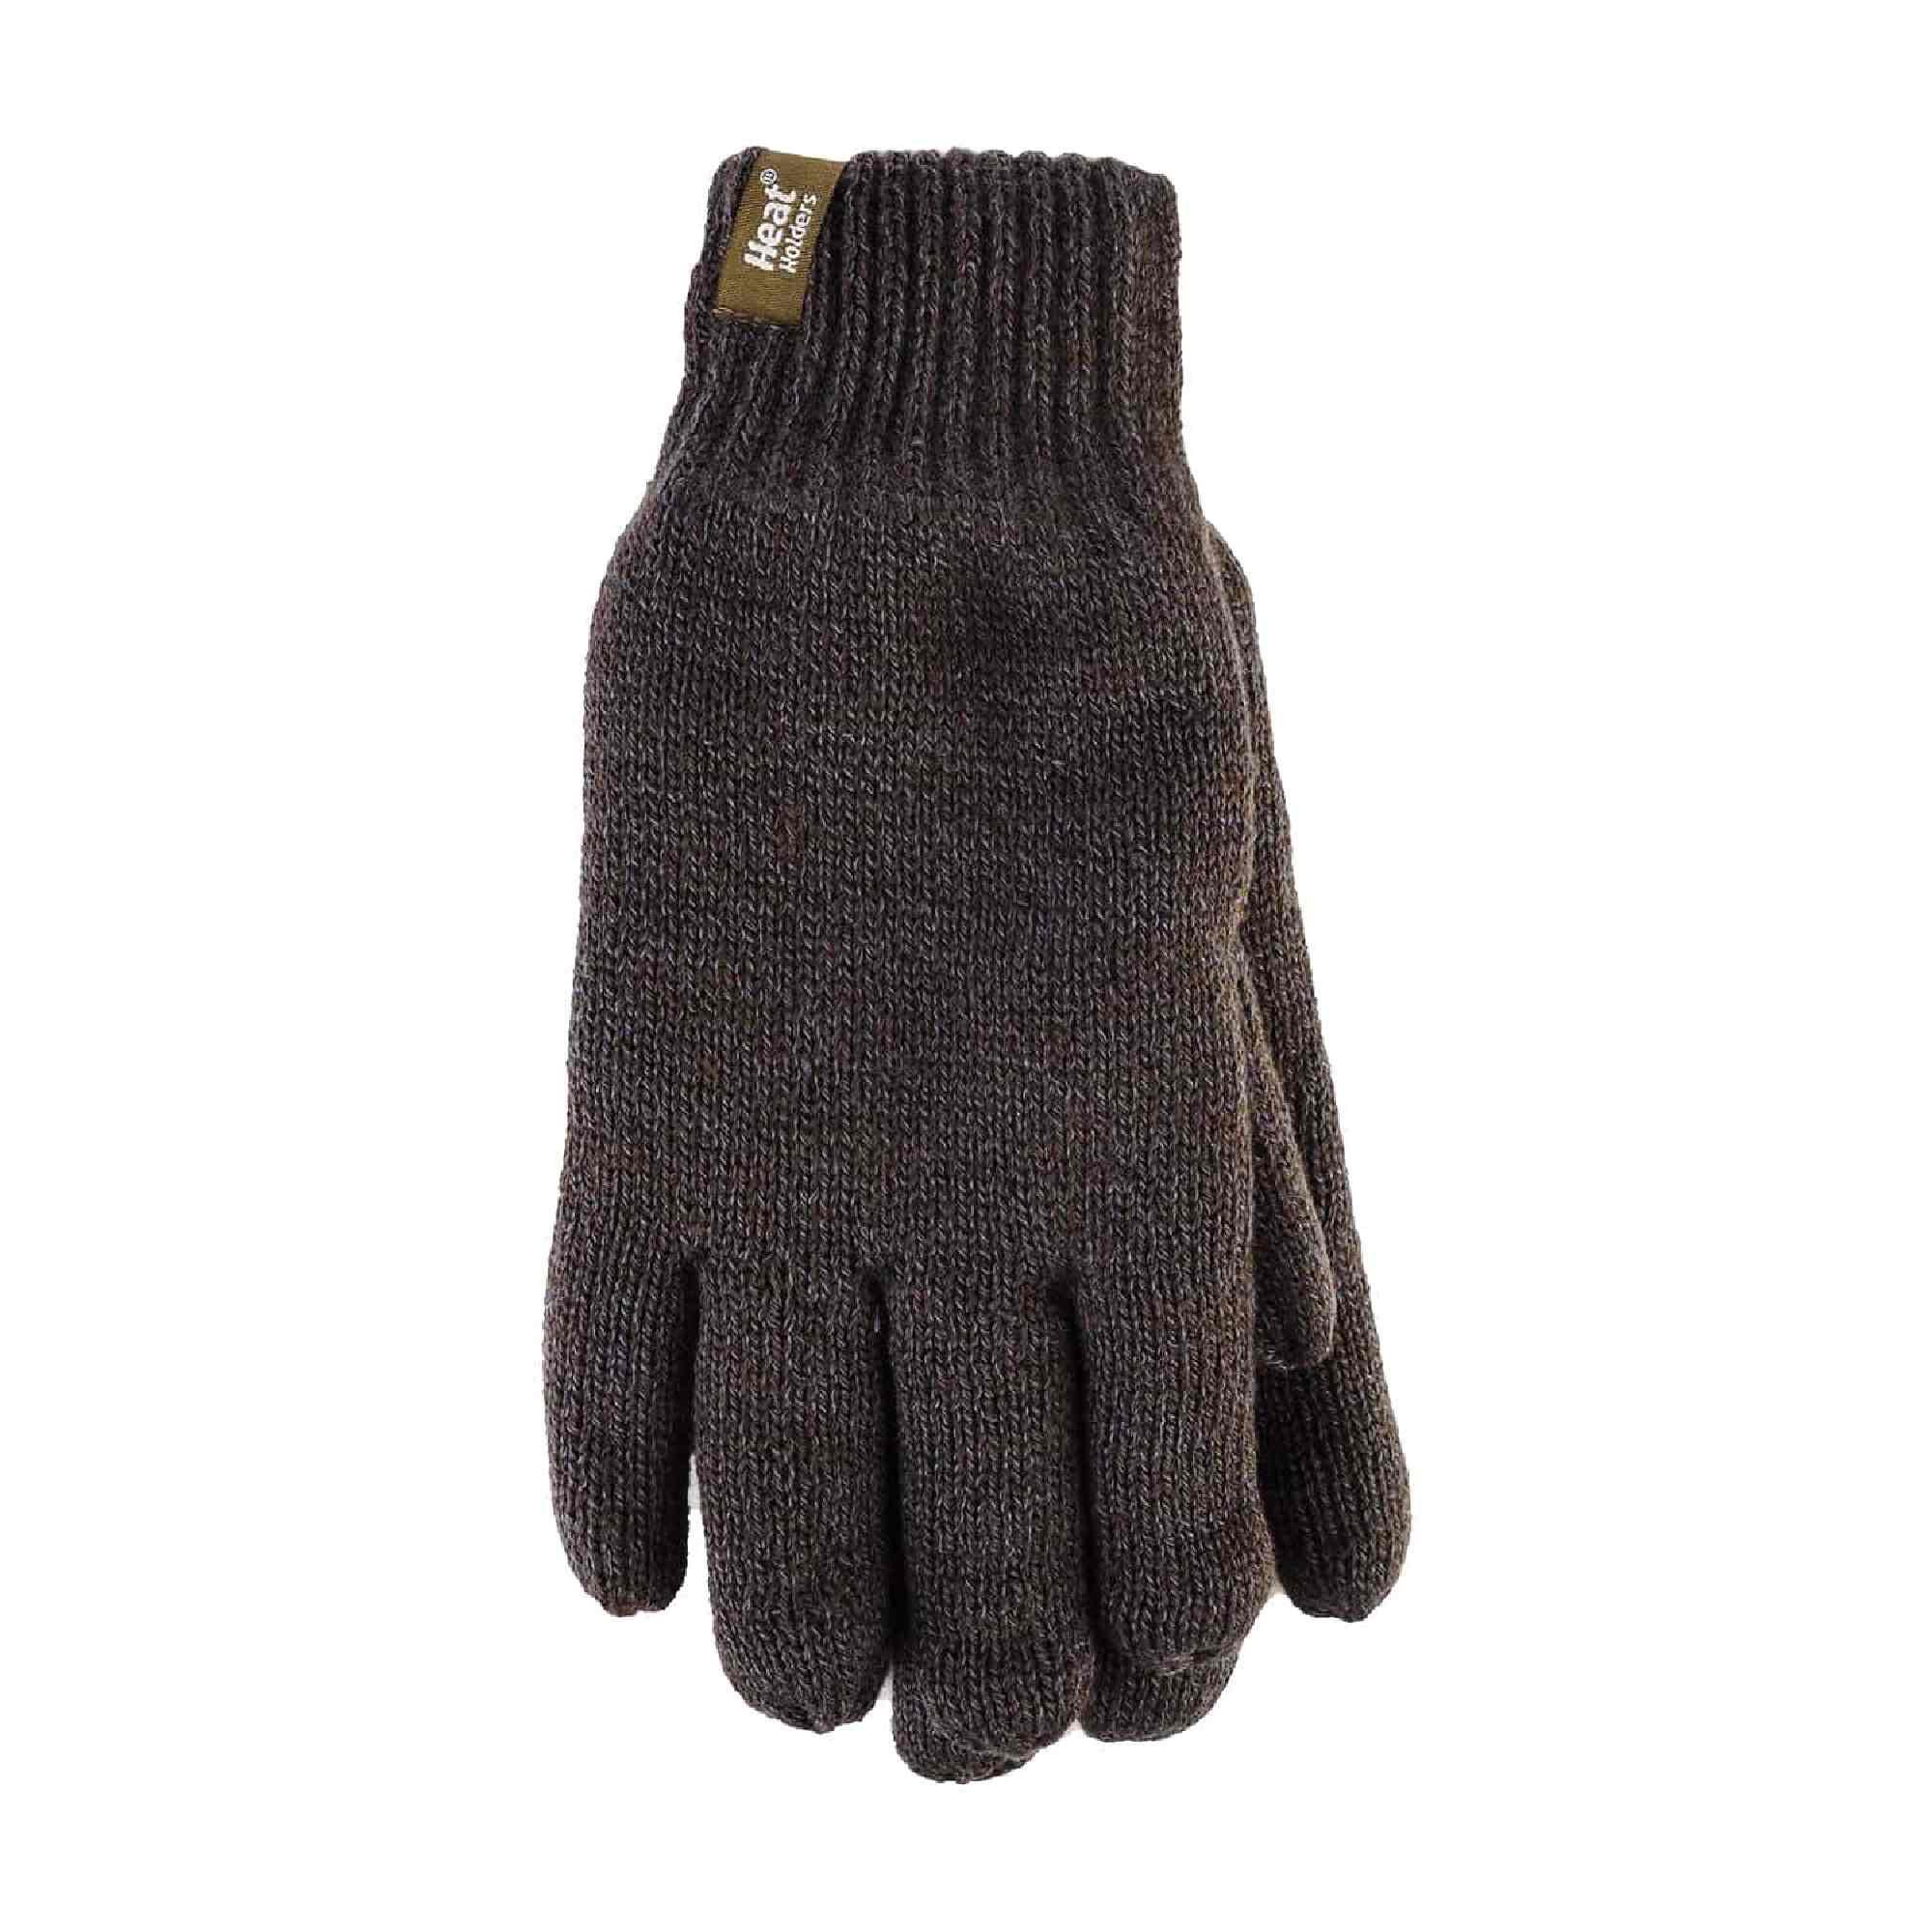 Mens Winter Warm Fleece Lined Thermal Gloves with Heatweaver Lining 1/4